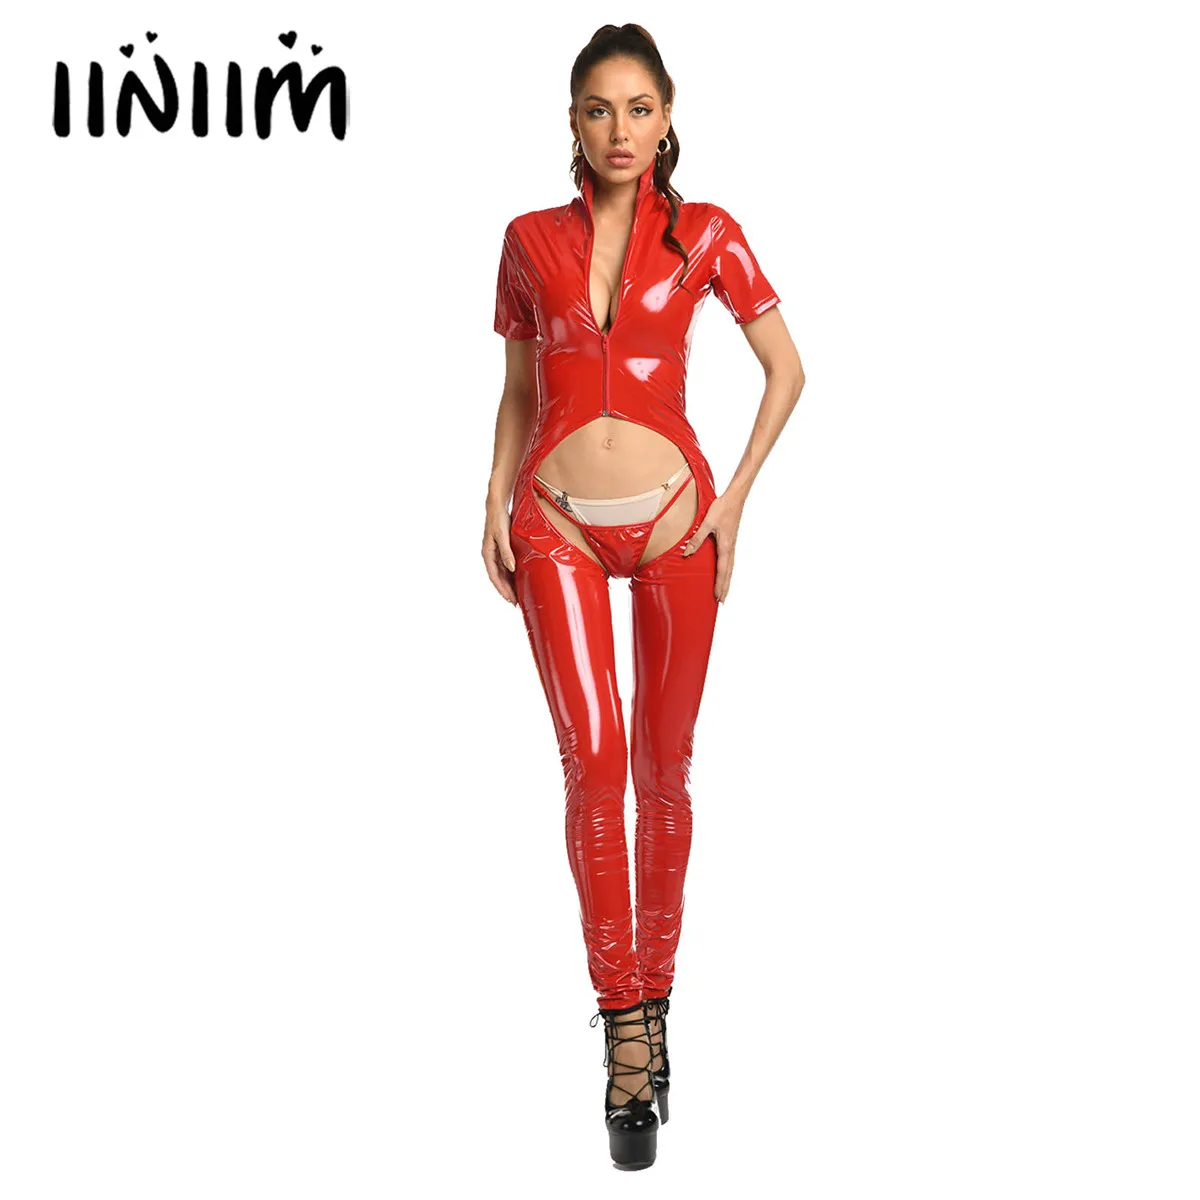 

Women Wet Look Patent Leather Catsuit Open Crotch Bodysuit Mock Neck Short Sleeve Zipper Lace-up Skinny Jumpsuits with G-strings